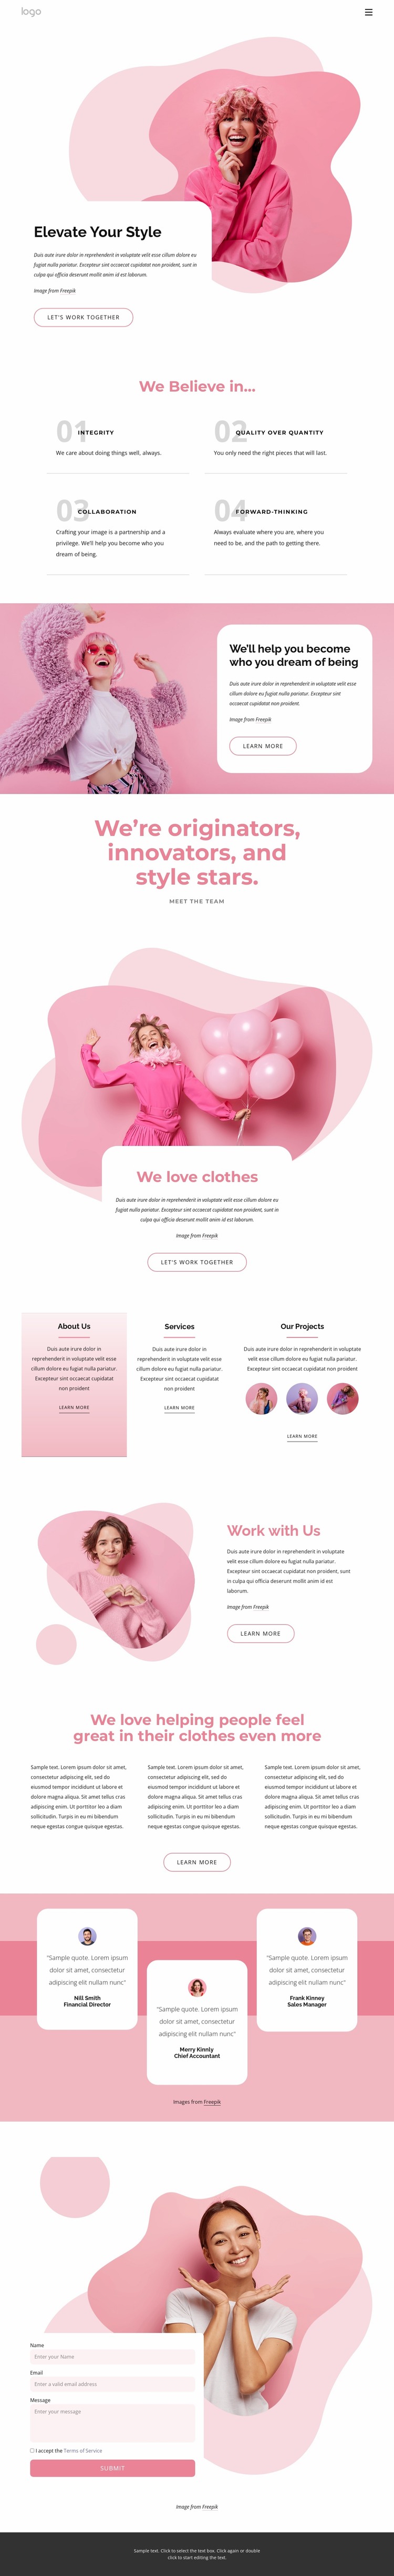 Elevate your style Website Mockup